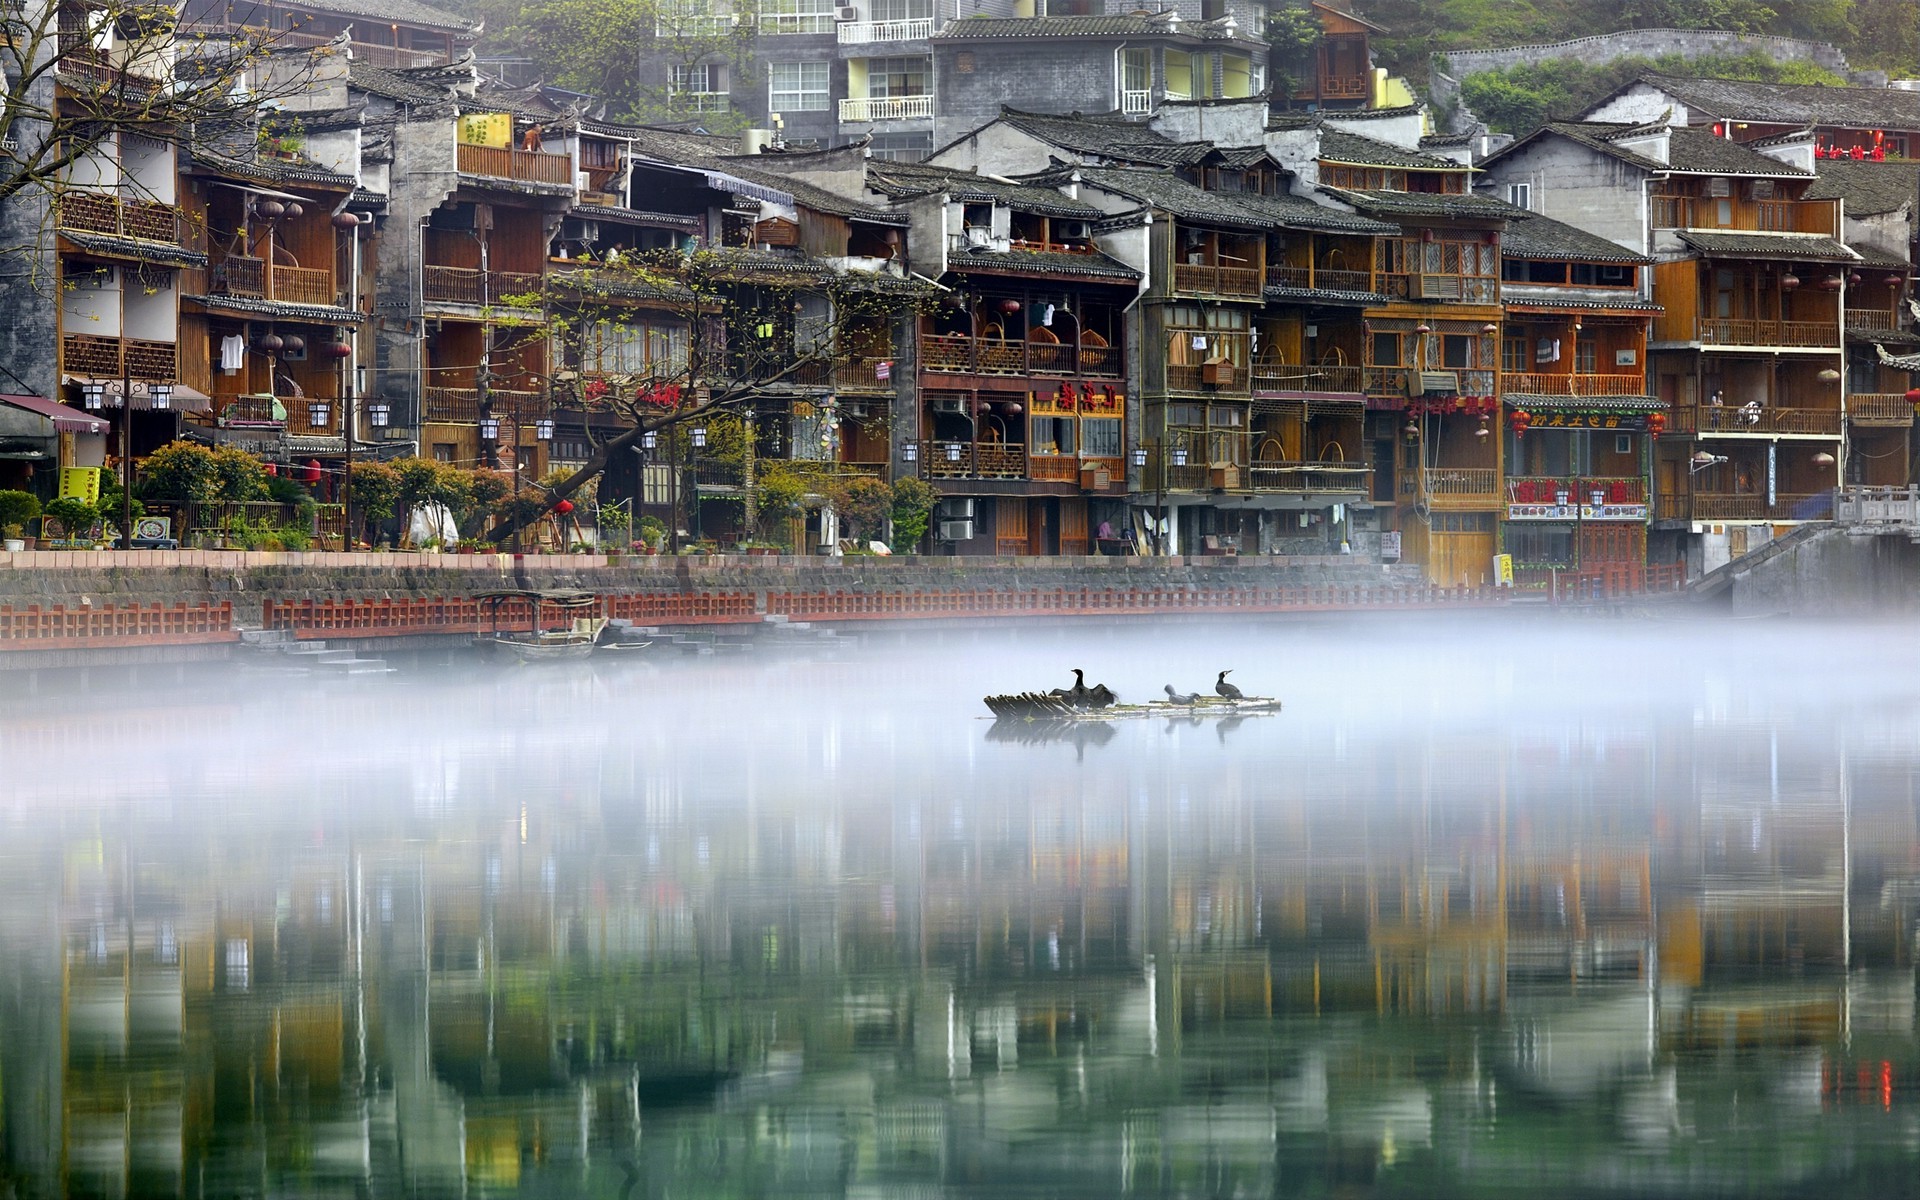 photography, Landscape, Phoenix Ancient Town, River, Mist, House, Water, Birds, Reflection, Nature, China Wallpaper